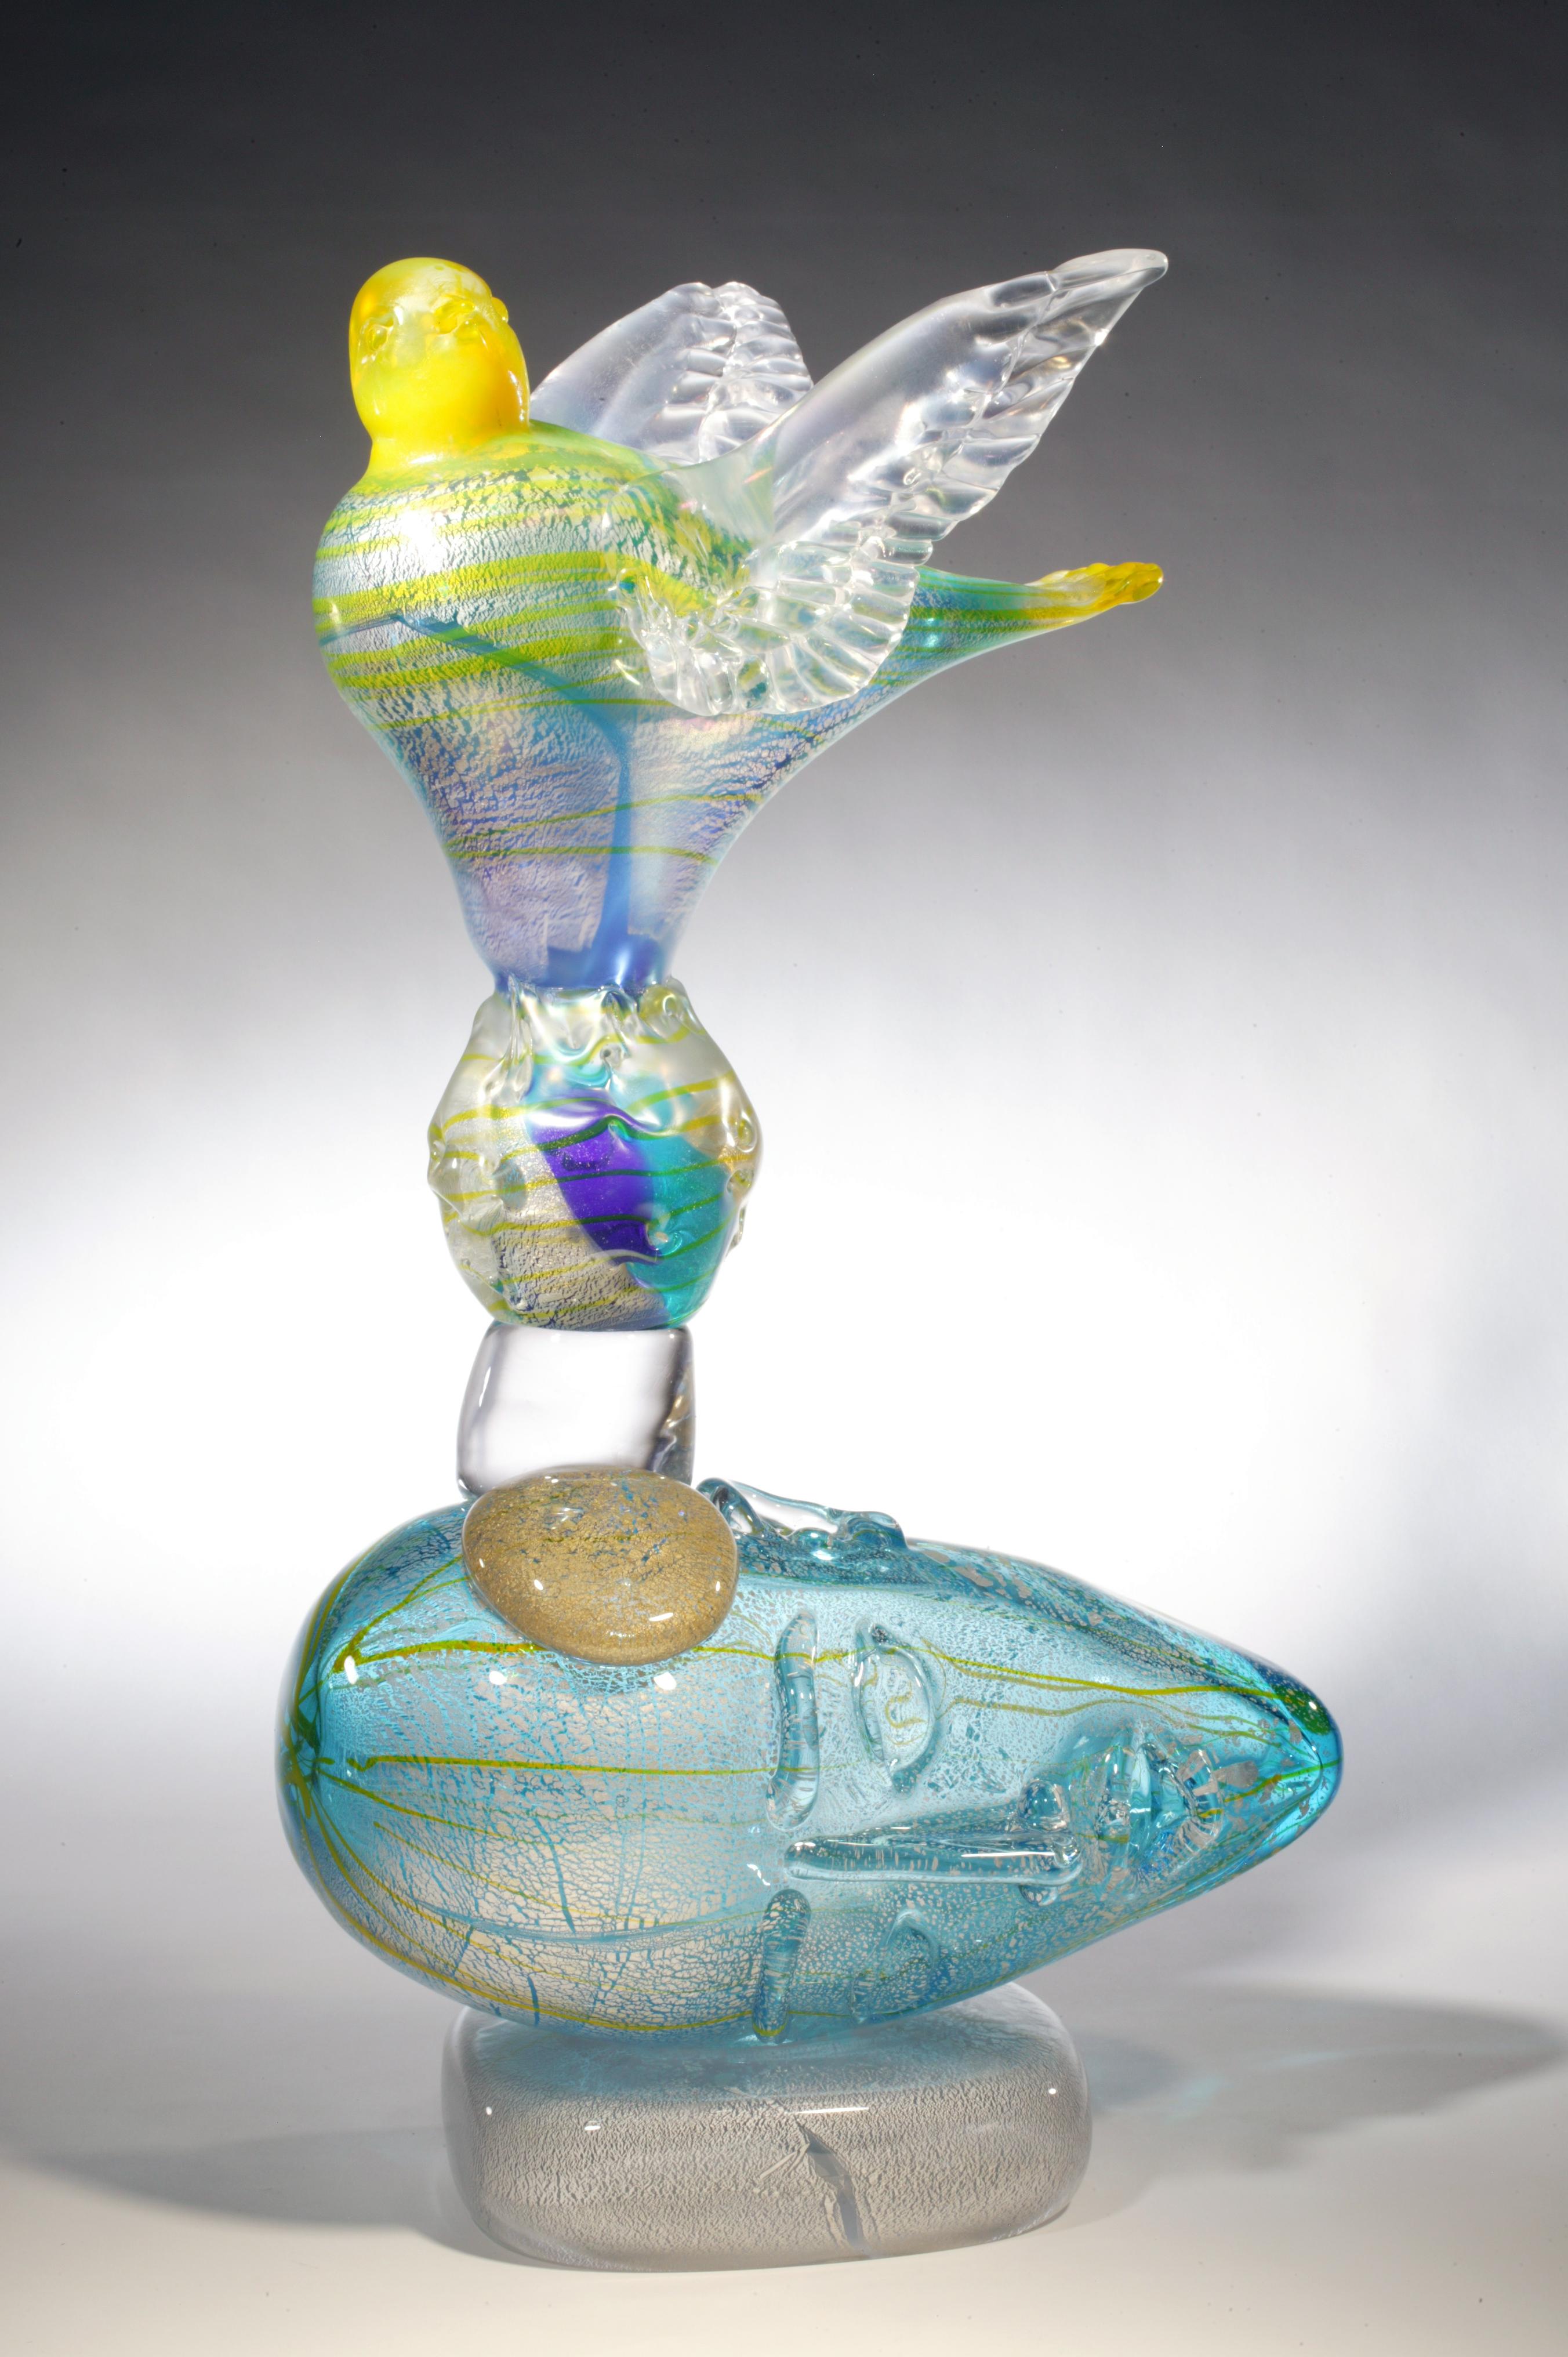 Richard Jolley Figurative Sculpture - SUSPENDED IN DREAMS AND GOLD COSMOS - blue and yellow blown glass sculpture